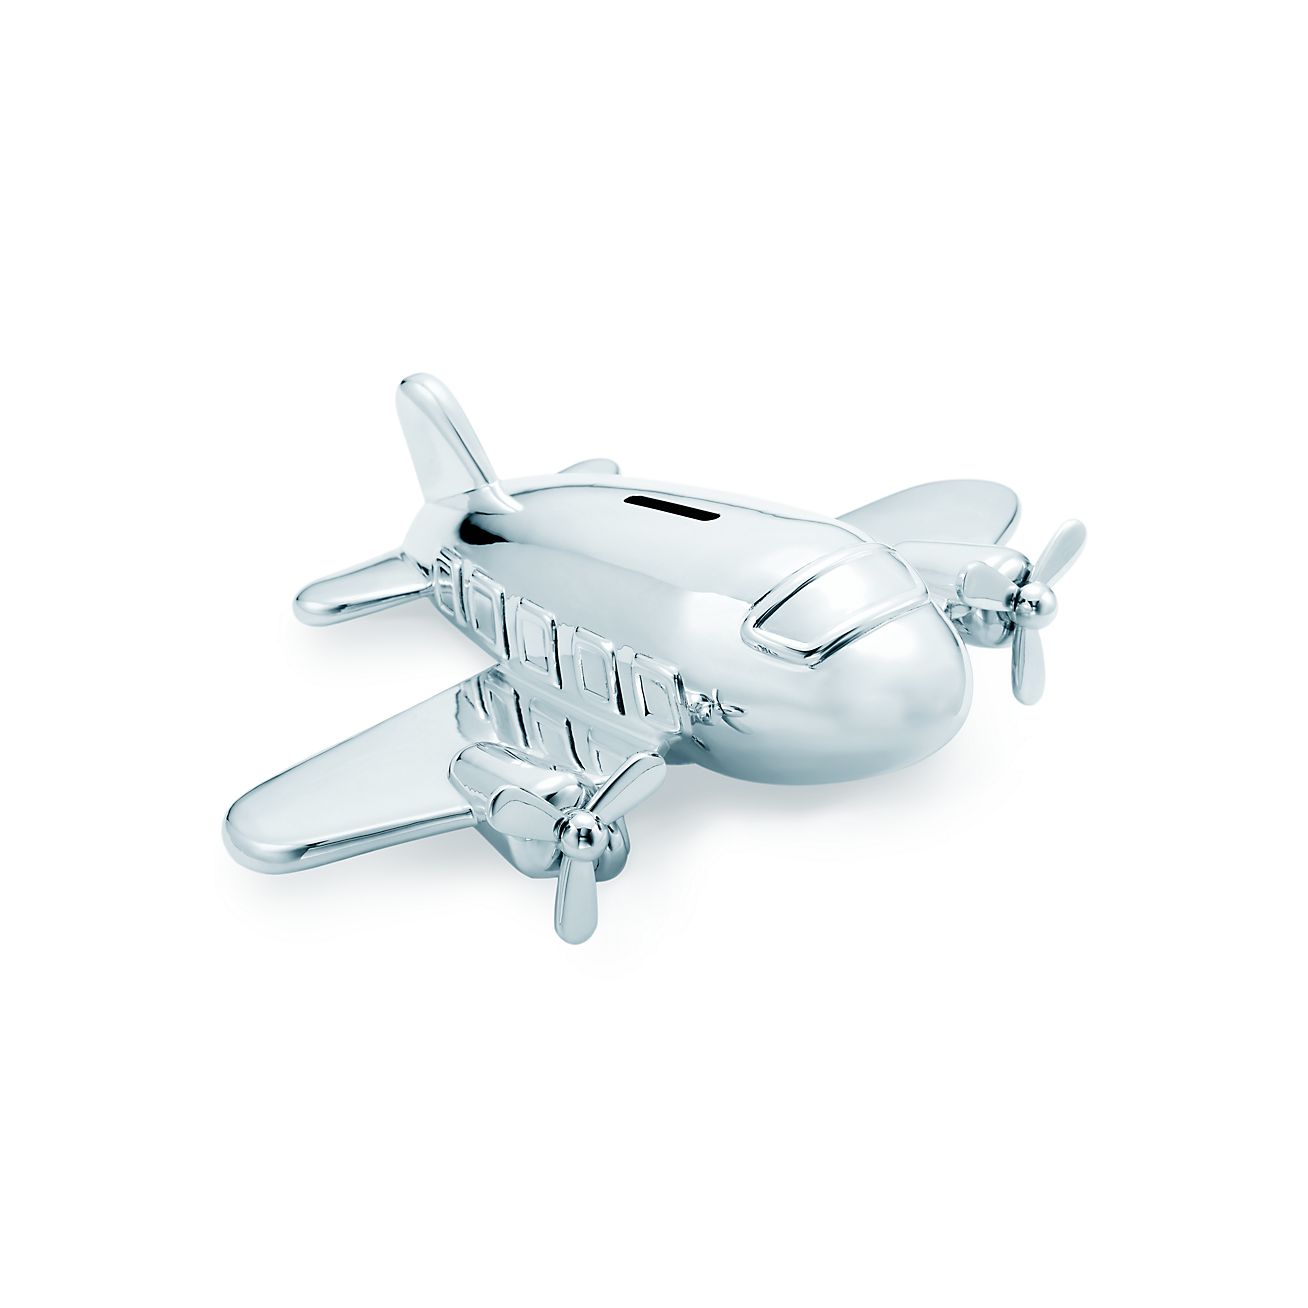 tiffany and co airplane necklace